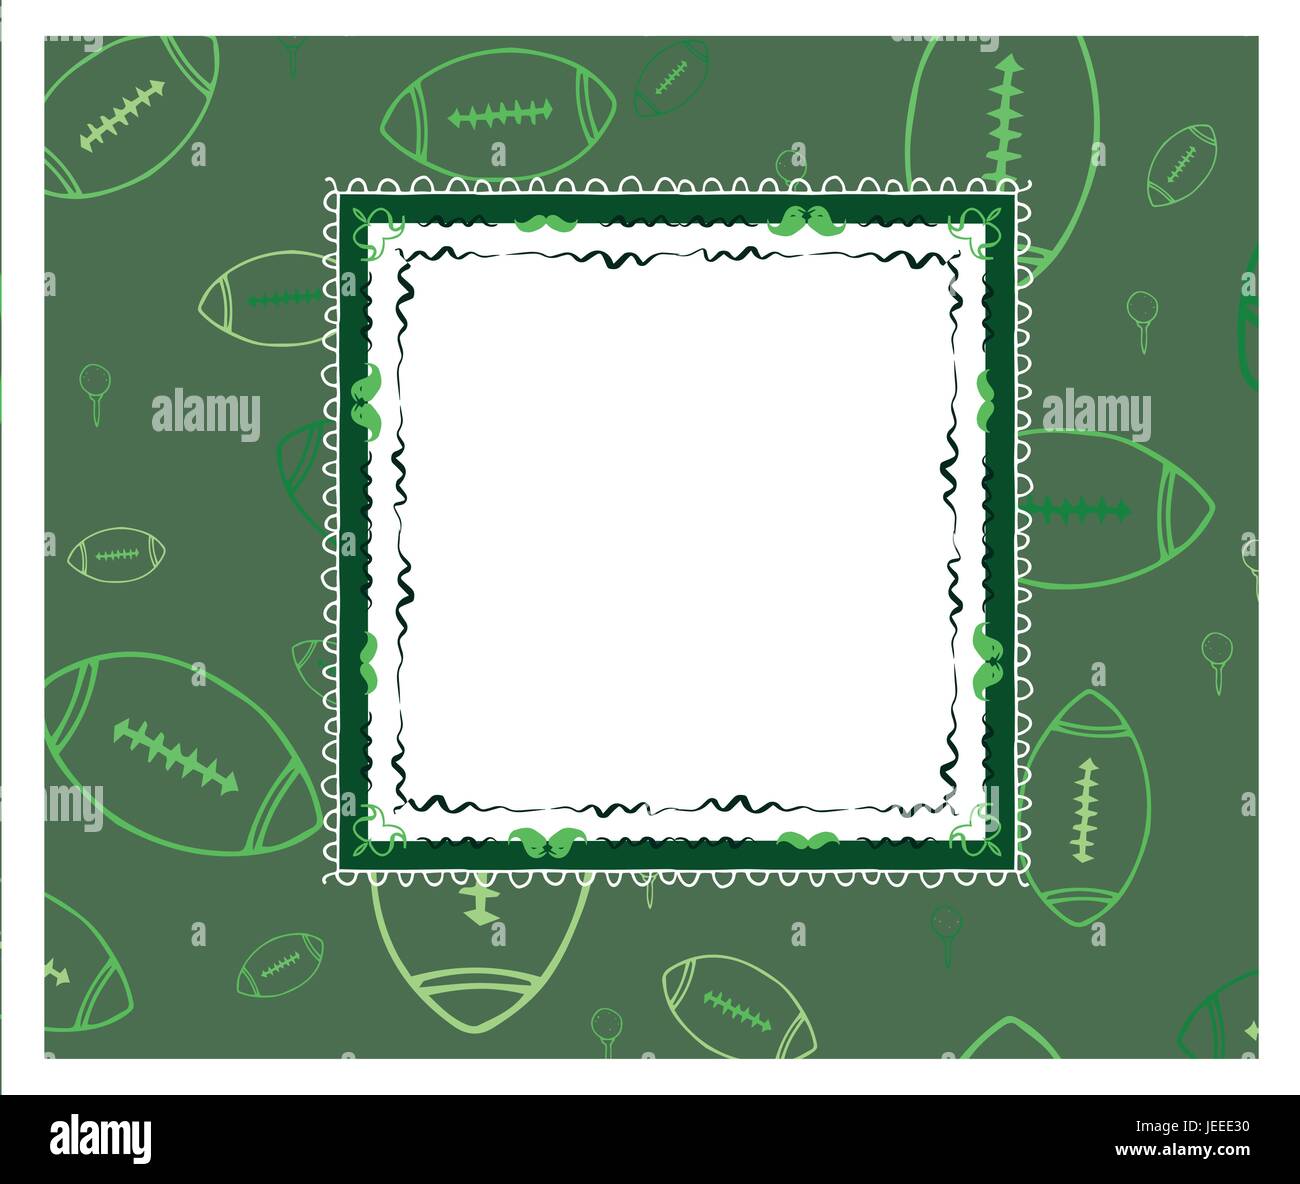 Card with rugby design Stock Vector